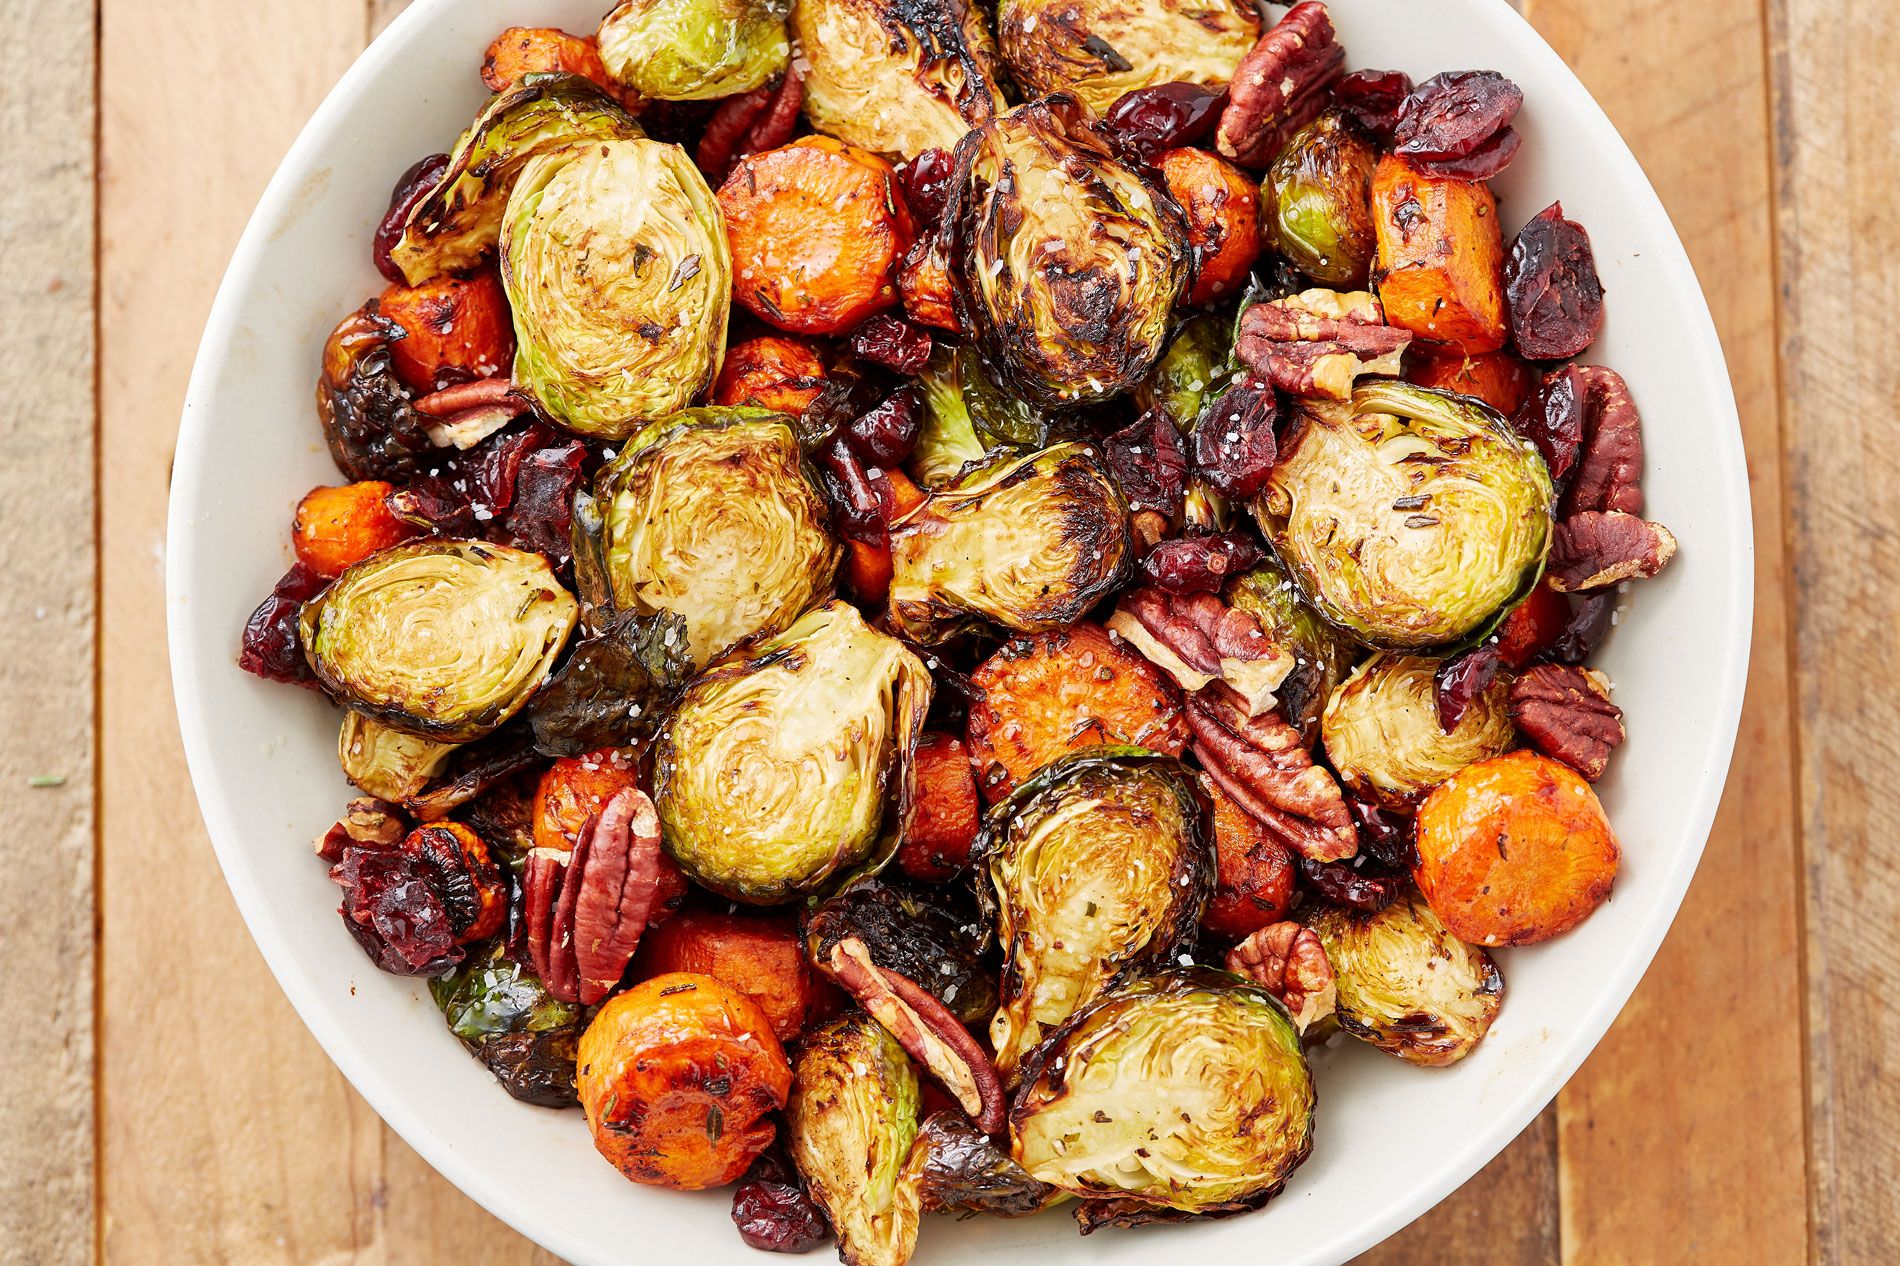 Best Roasted Vegetable Medley Perfect Vegetable Medley Recipe,How To Paint Cabinets To Look Like Wood Grain